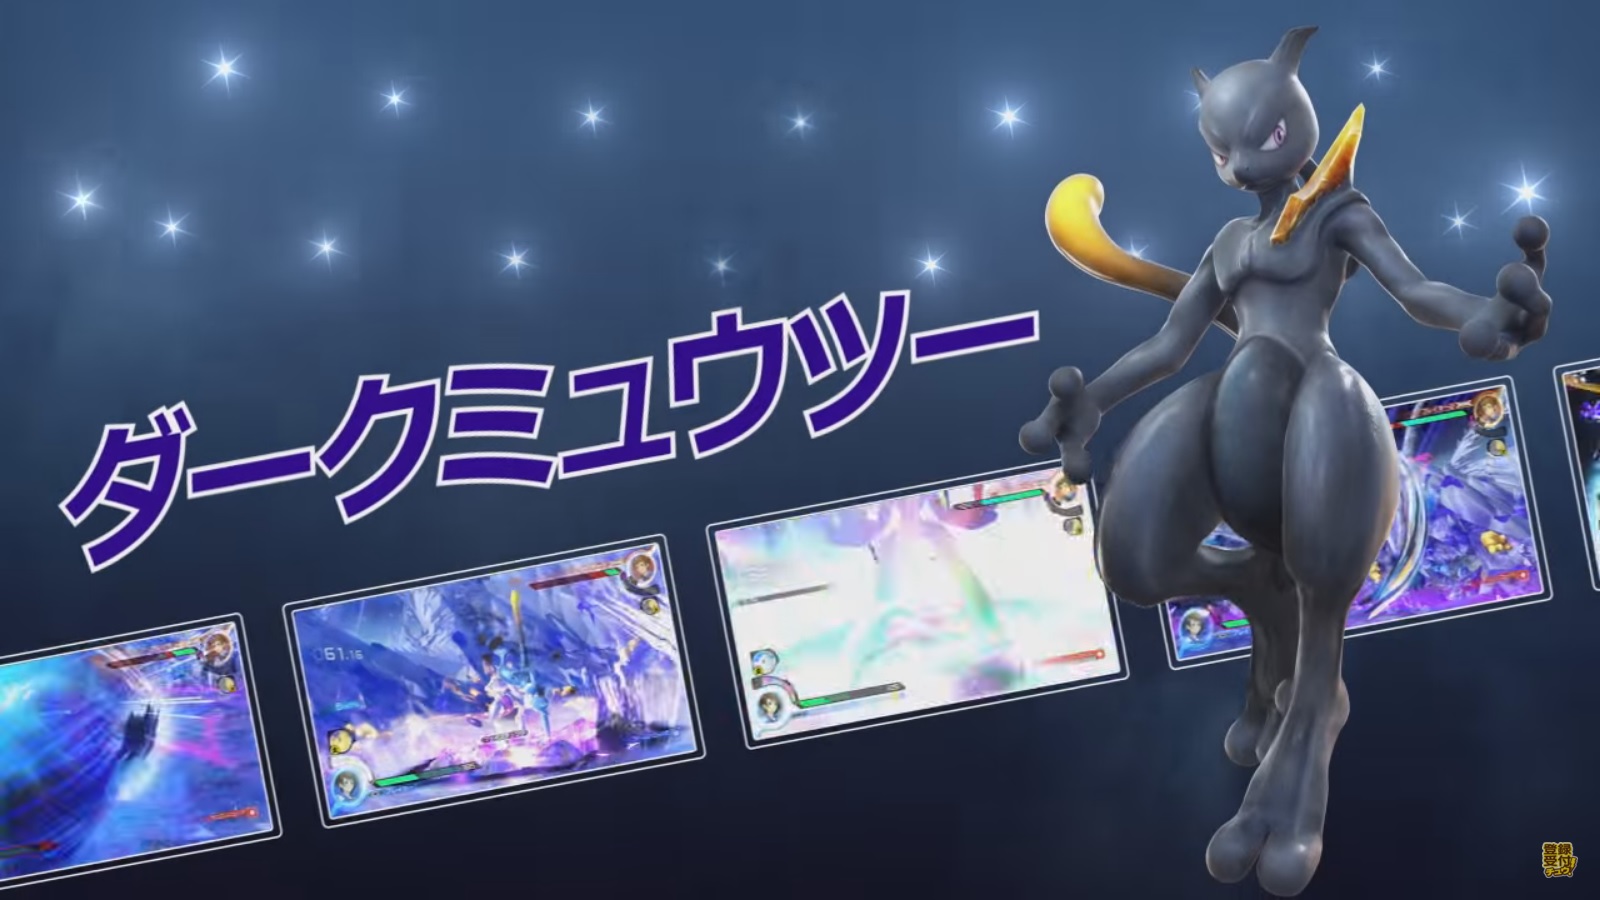 Japanese Pokken Tournament video performing moves with Mewtwo and